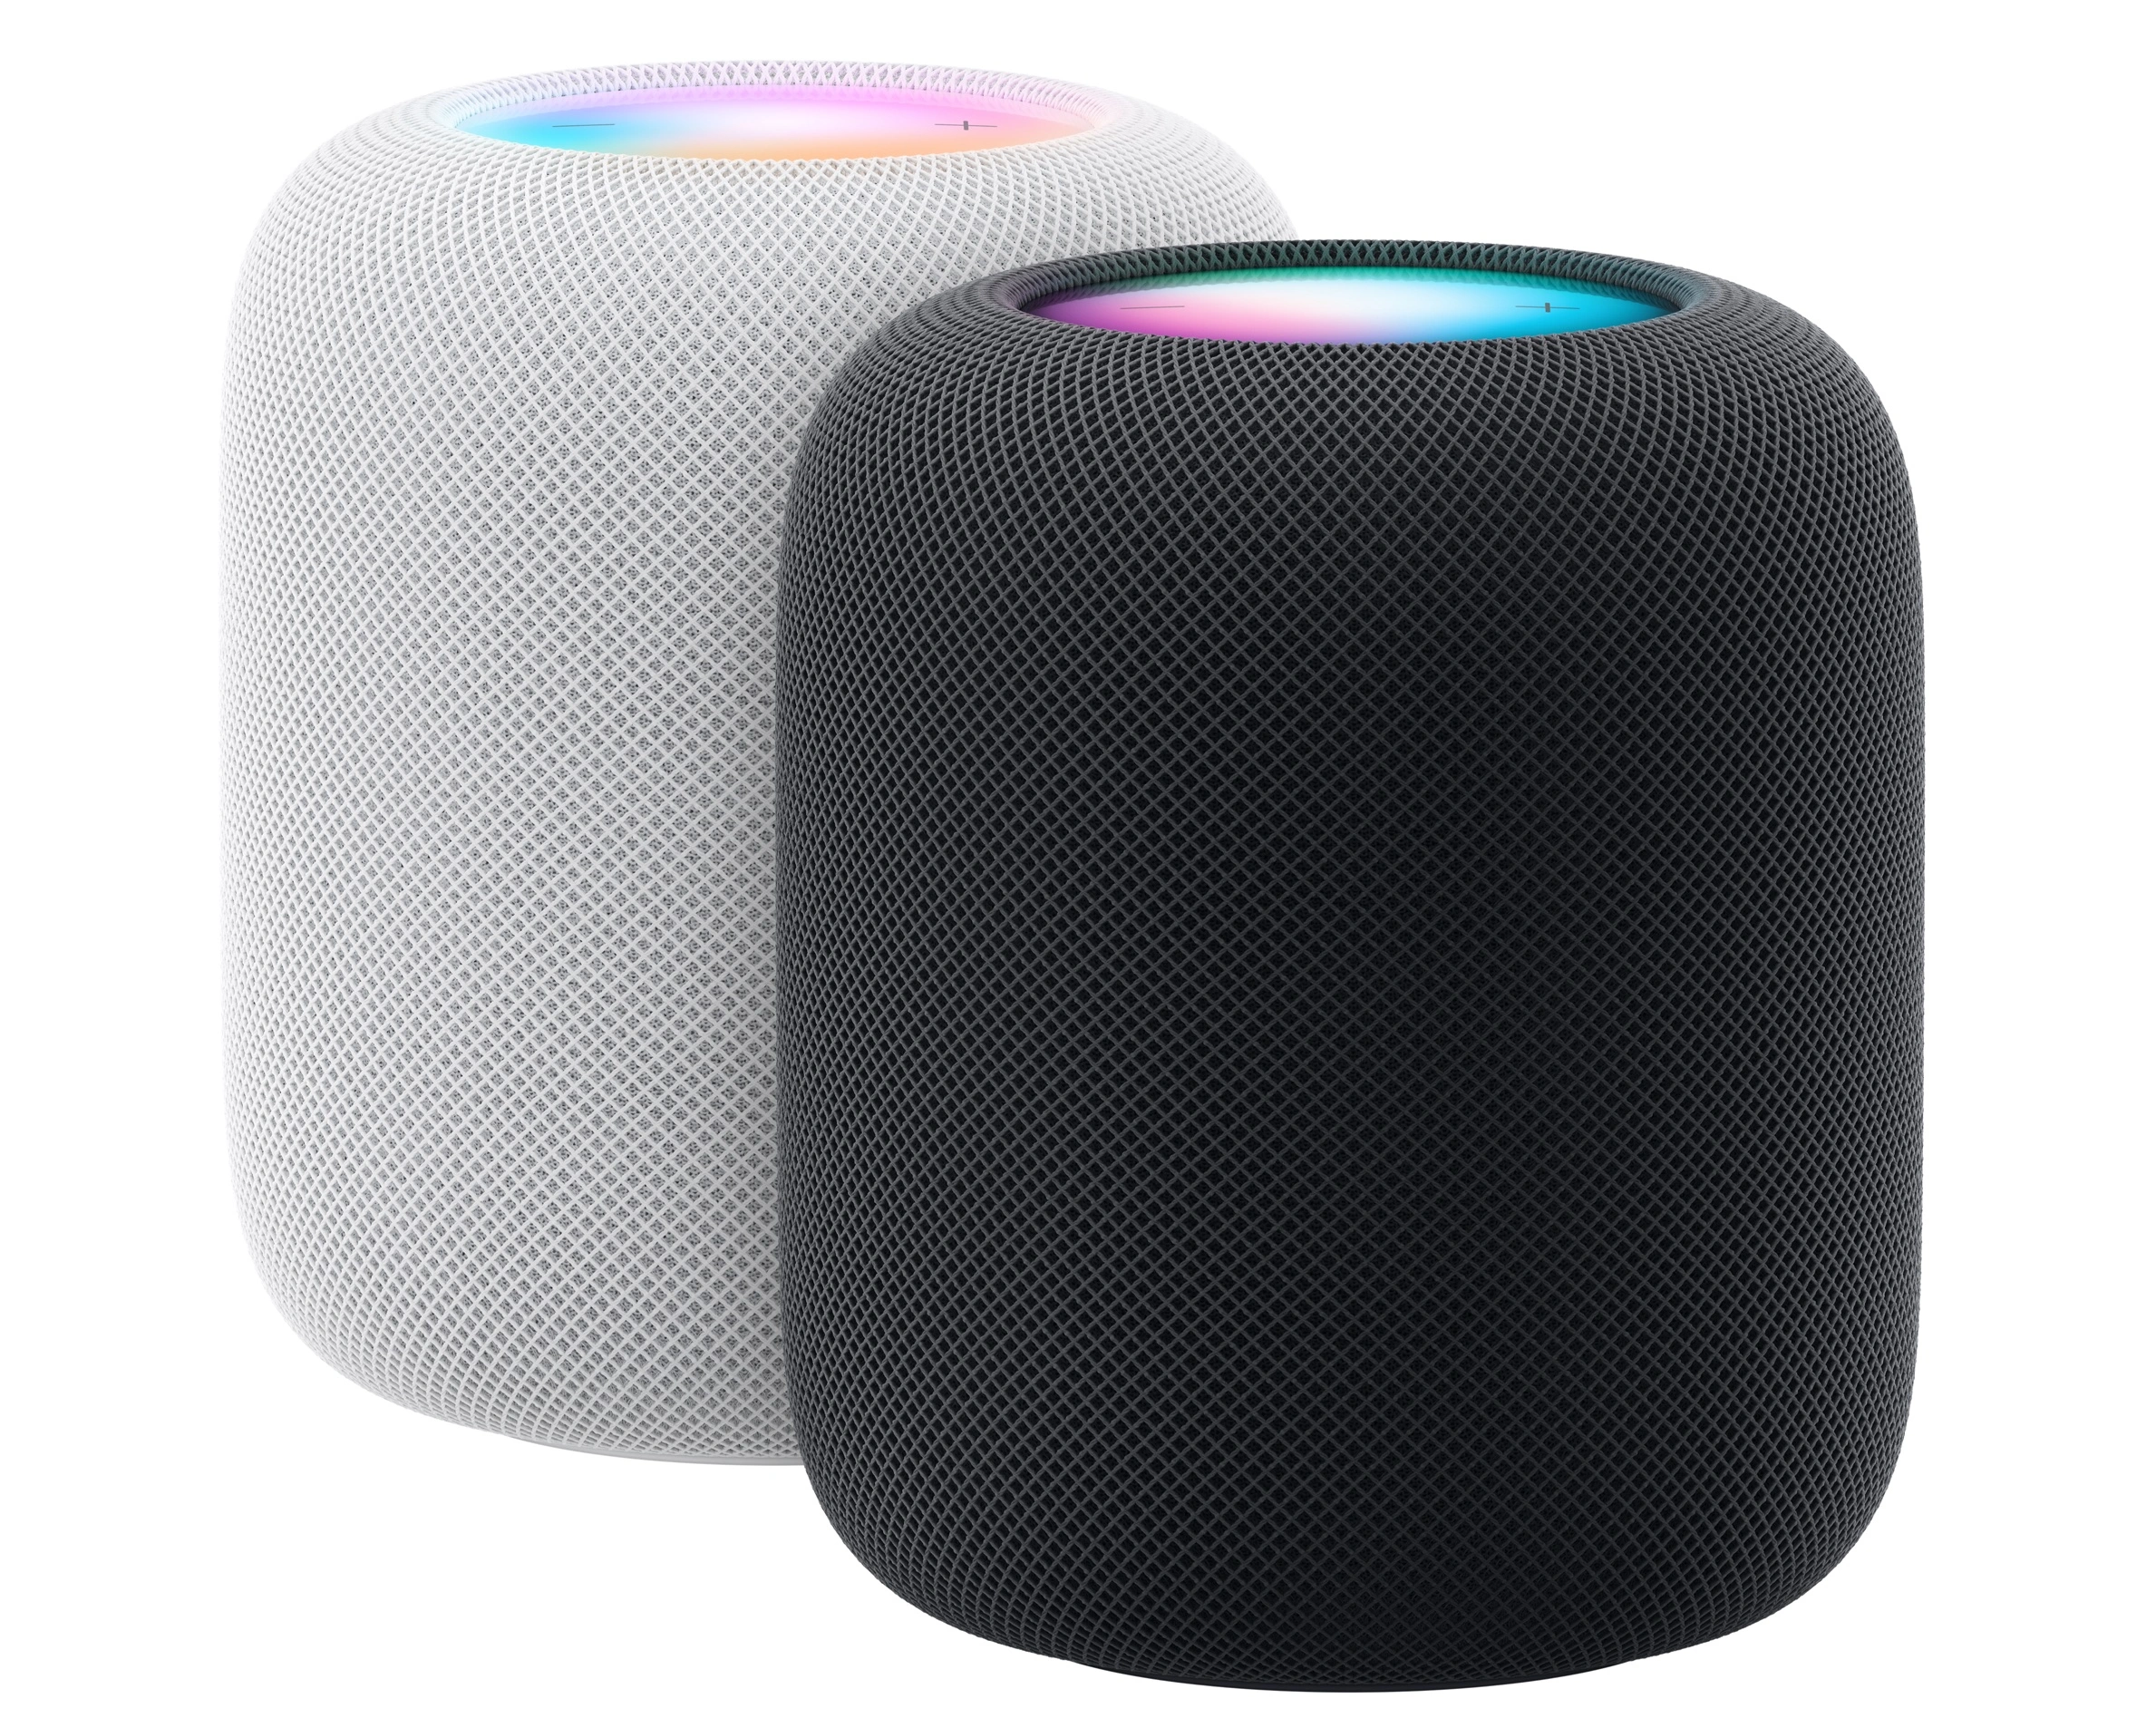 Apple Homepod will find your missing Apple device! Comes with this smart feature